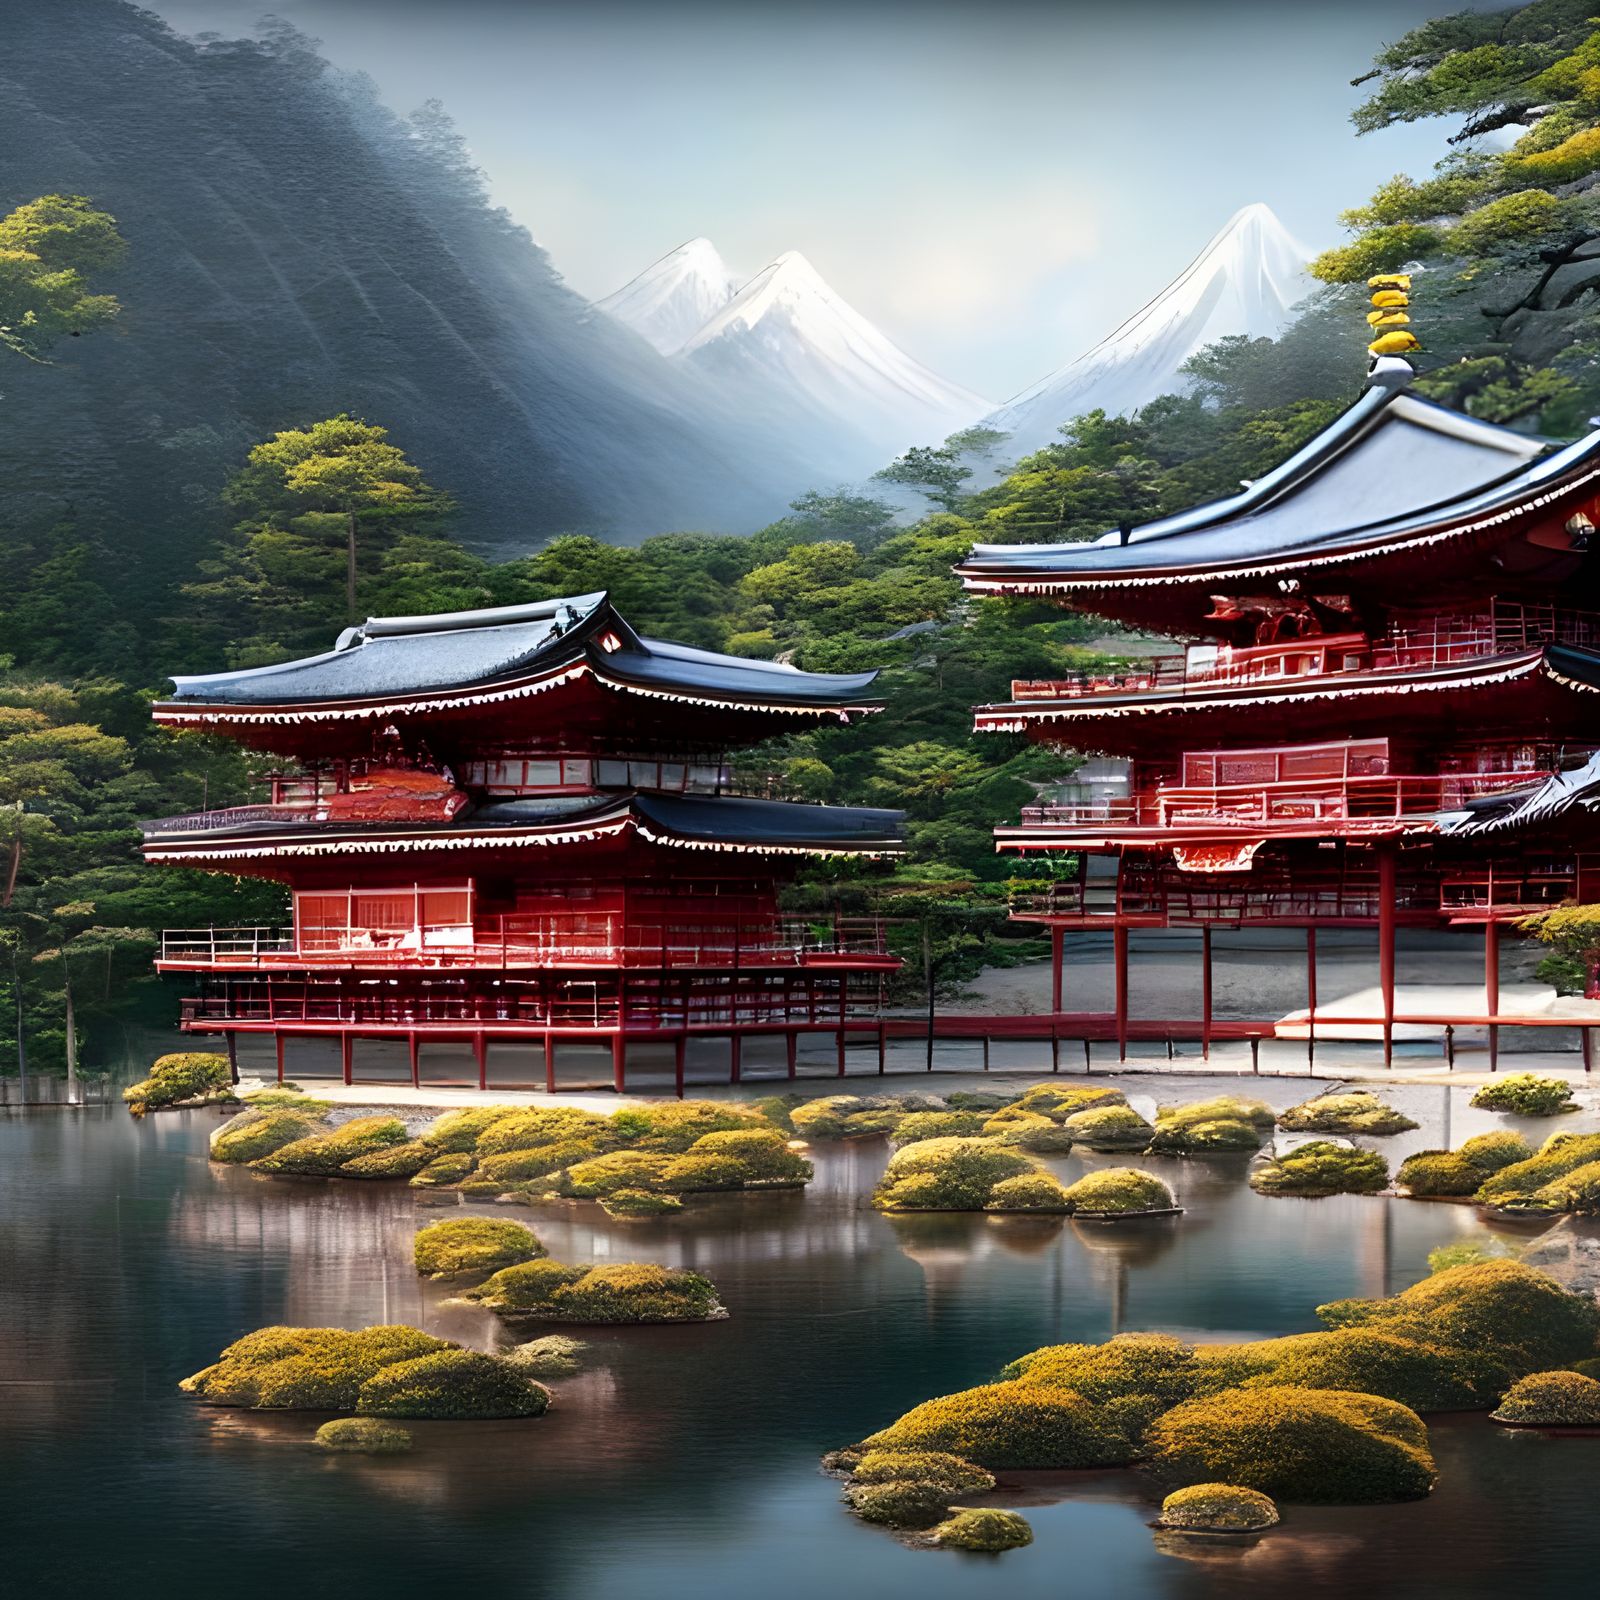 Shogun palace in the Mountains